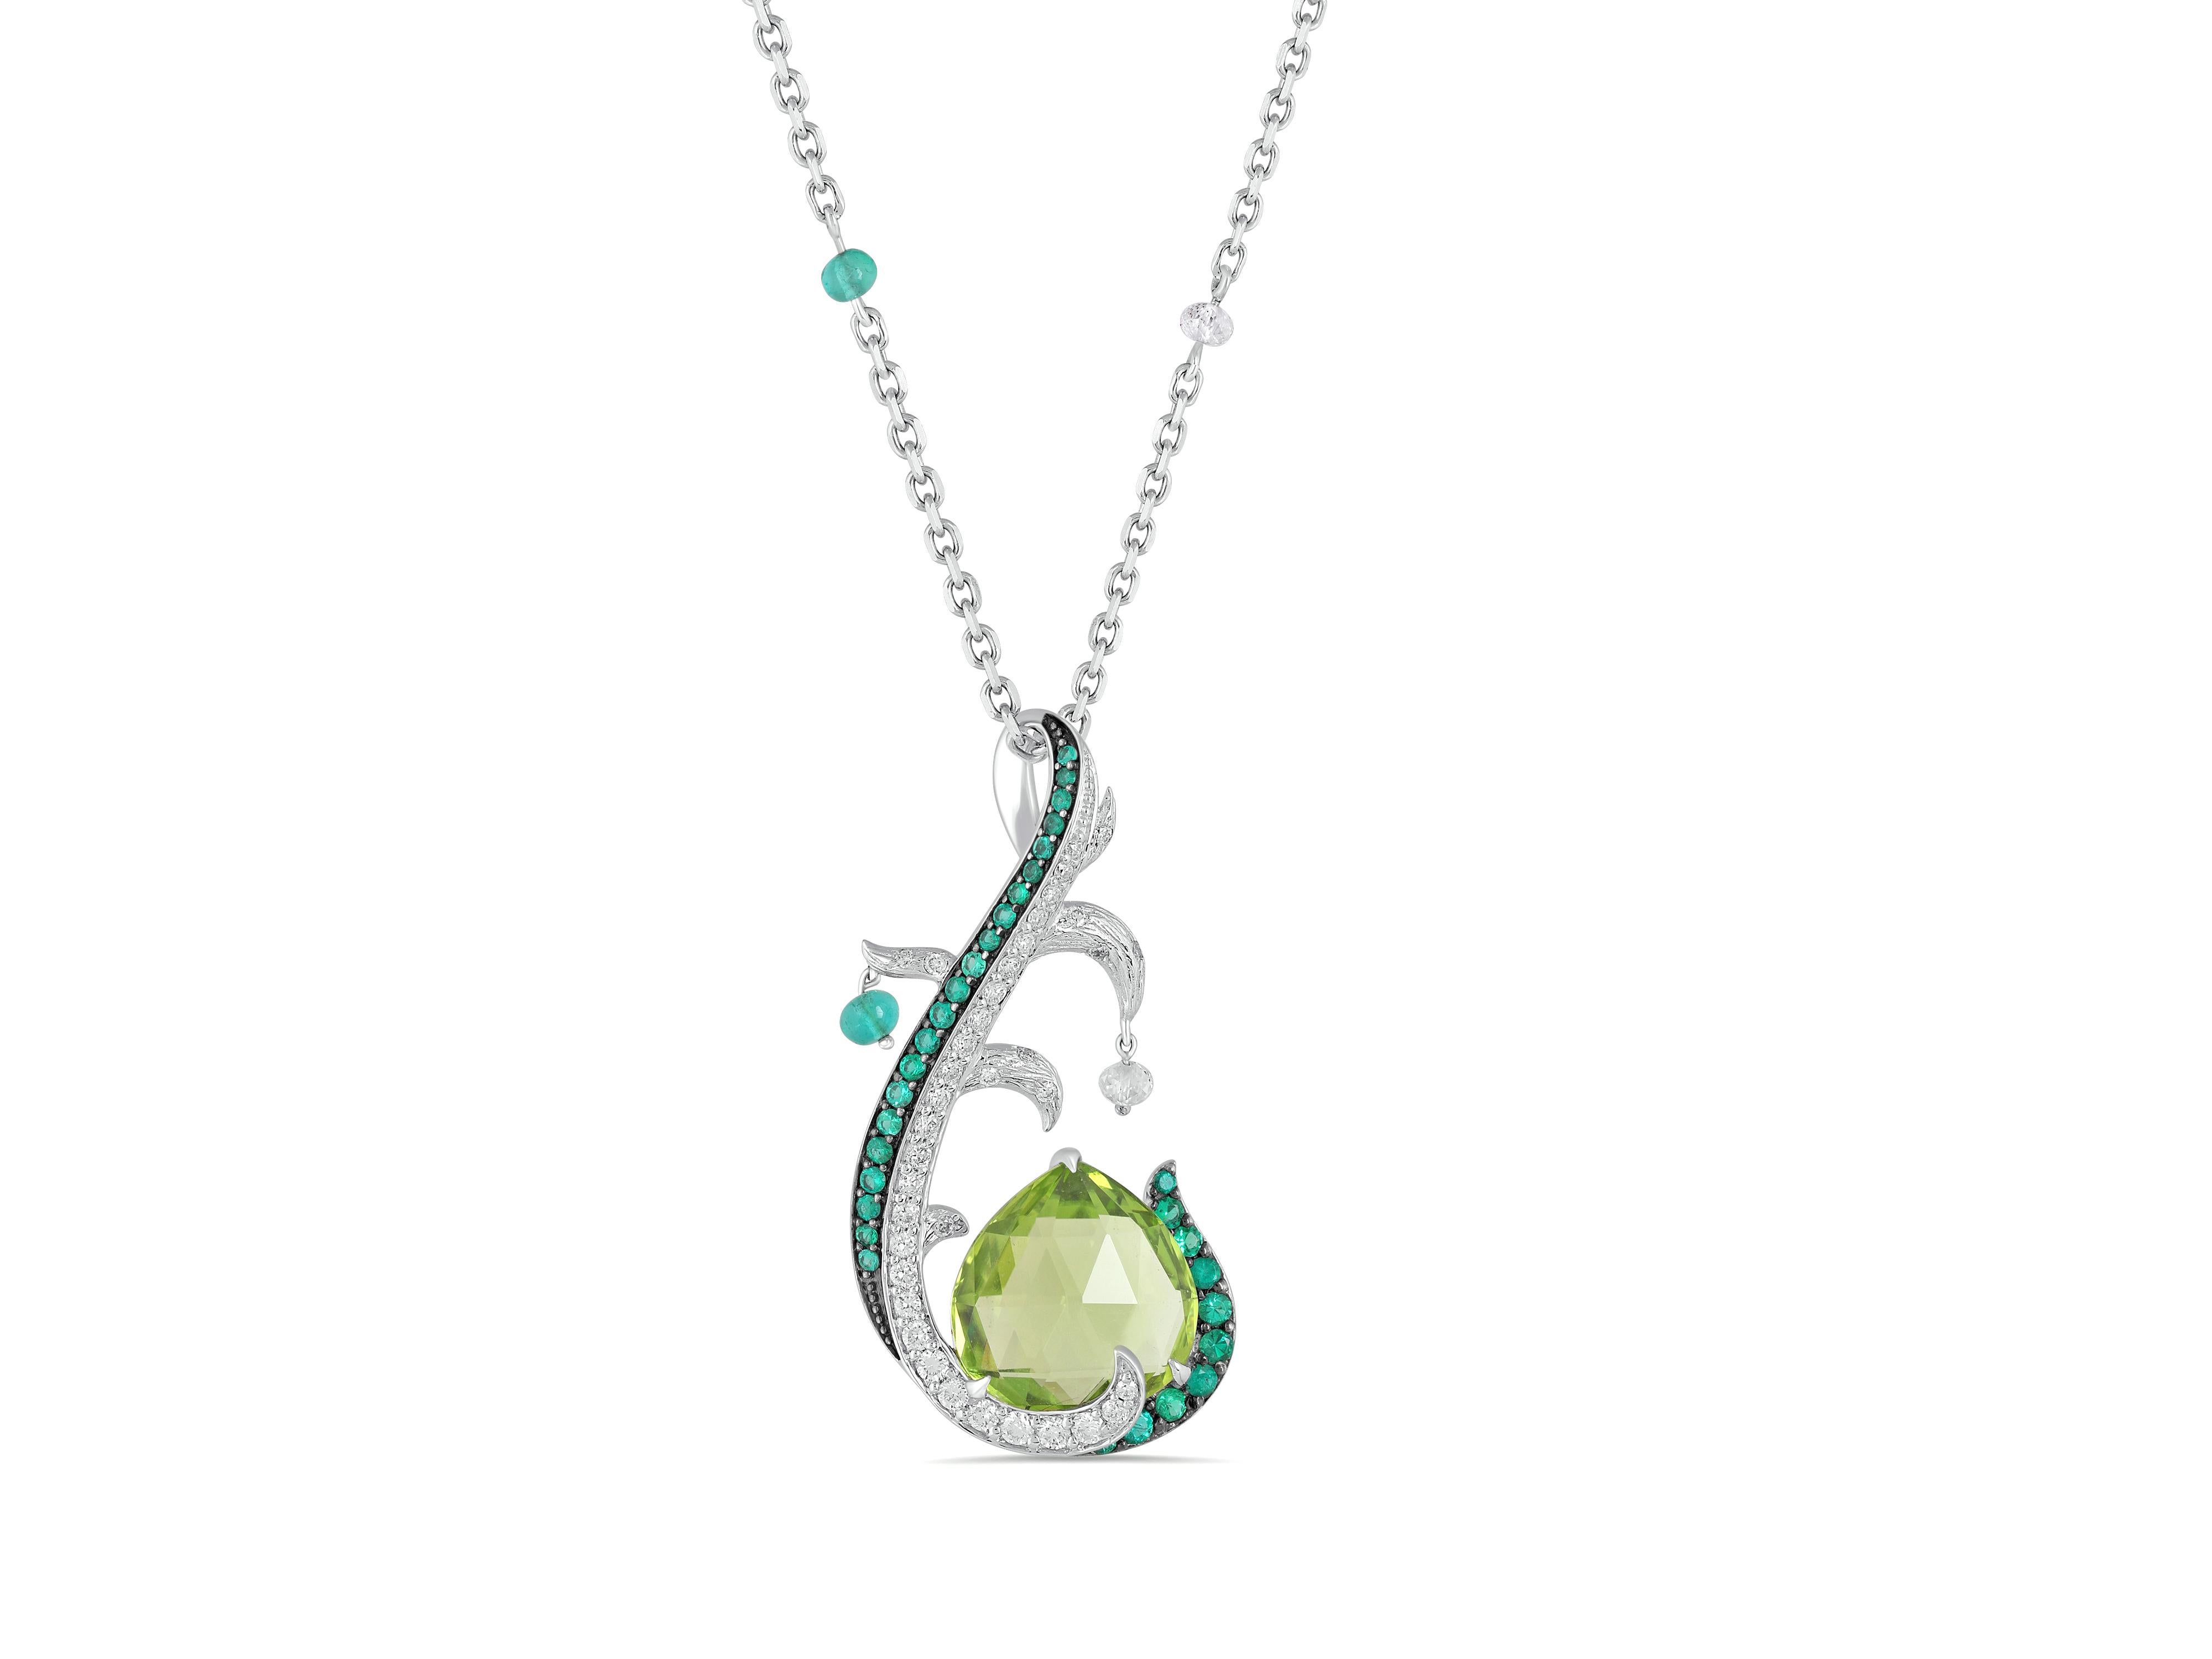 Faceted peridot drops form the centre piece of this tree-inspired pendant in 18 karat white gold.

Emerald and diamond beads hang on the branches, that have been textured to resemble the surface of a tree’s trunk.

Round, brilliant cut diamonds and